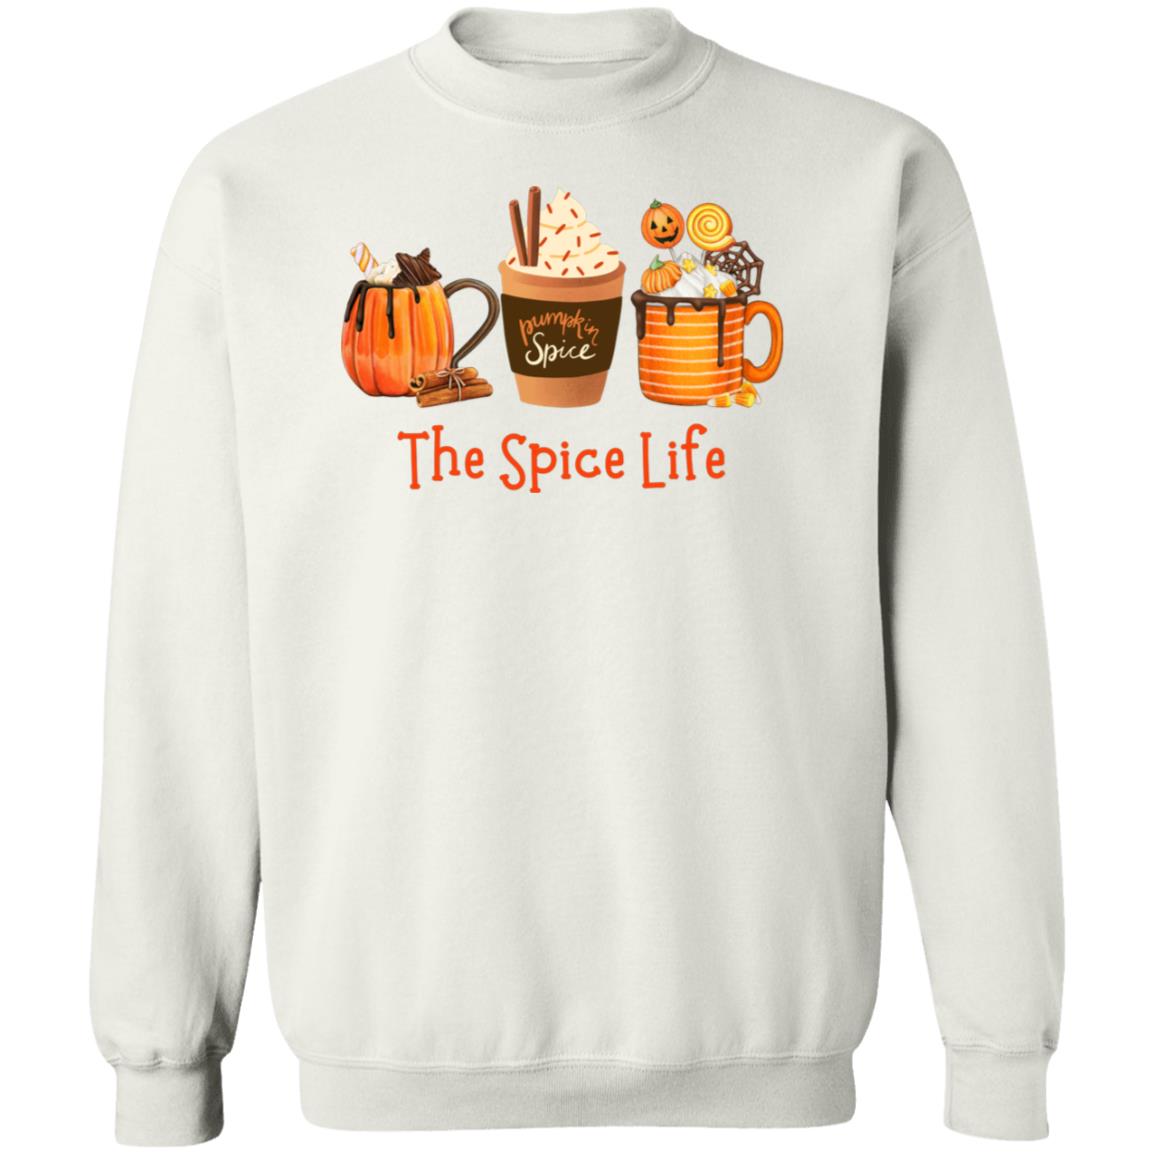 The Spice Life Shirt